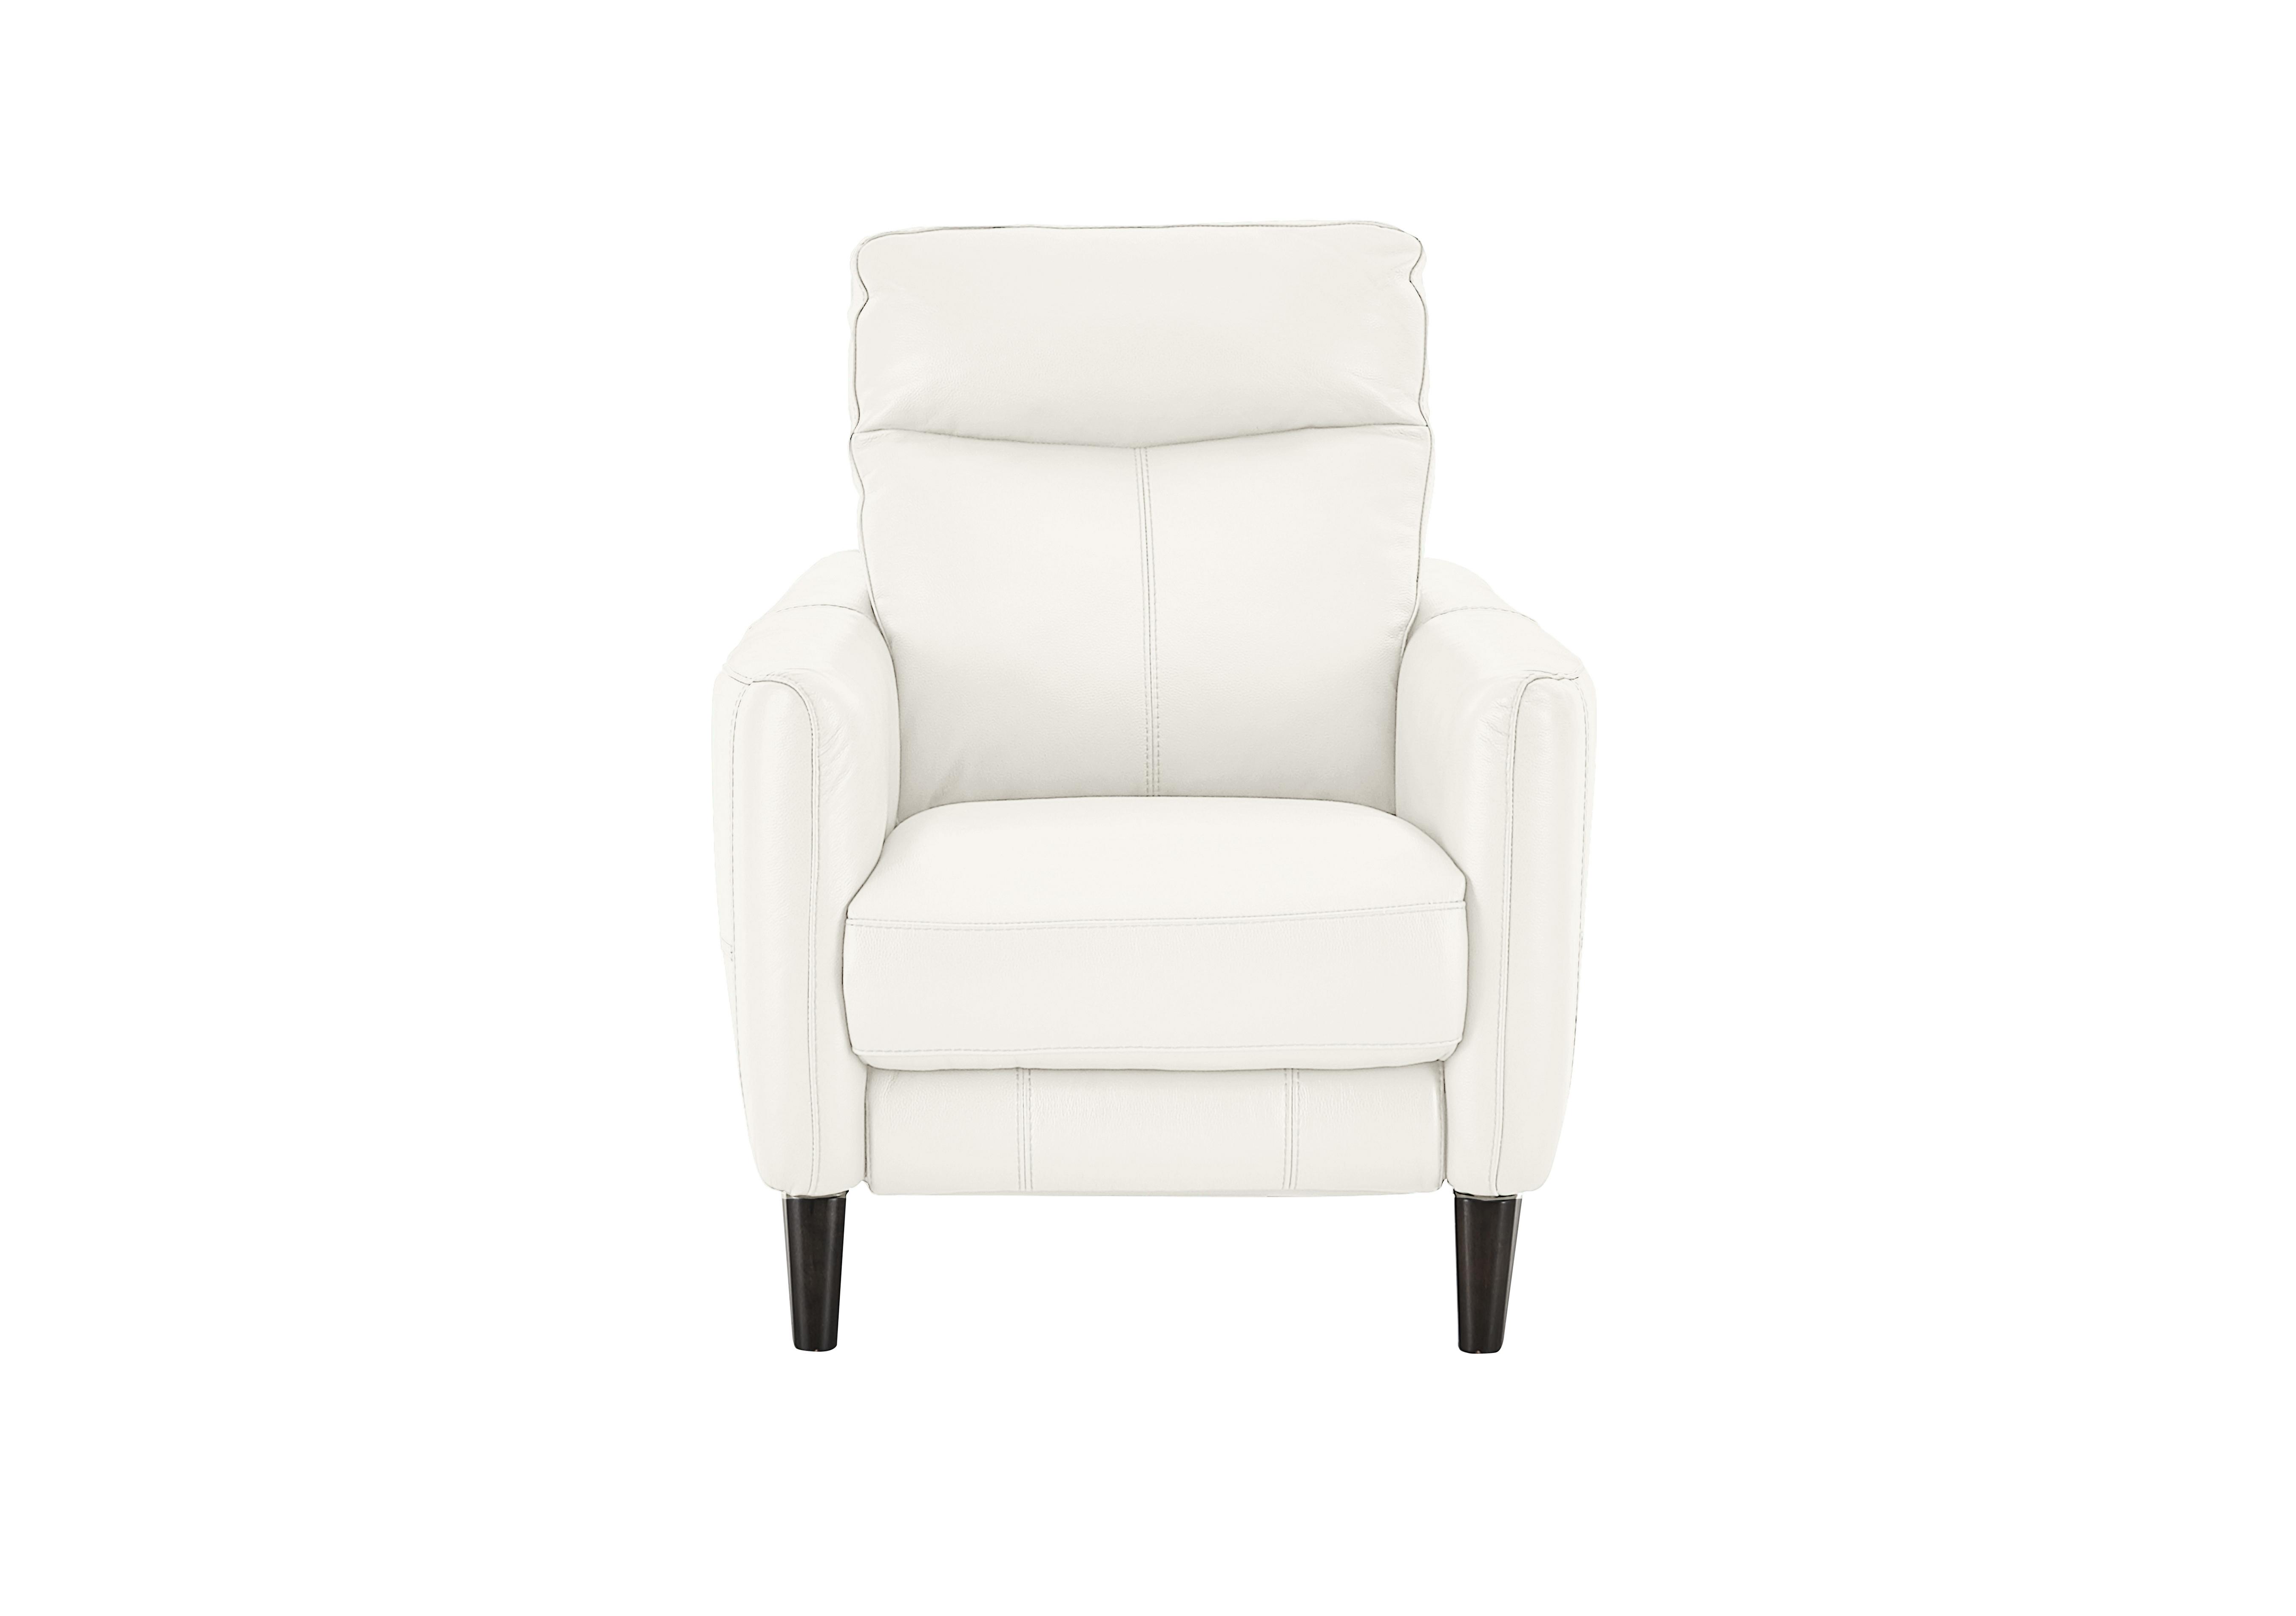 Compact Collection Petit Leather Recliner Armchair in Bv-744d Star White on Furniture Village